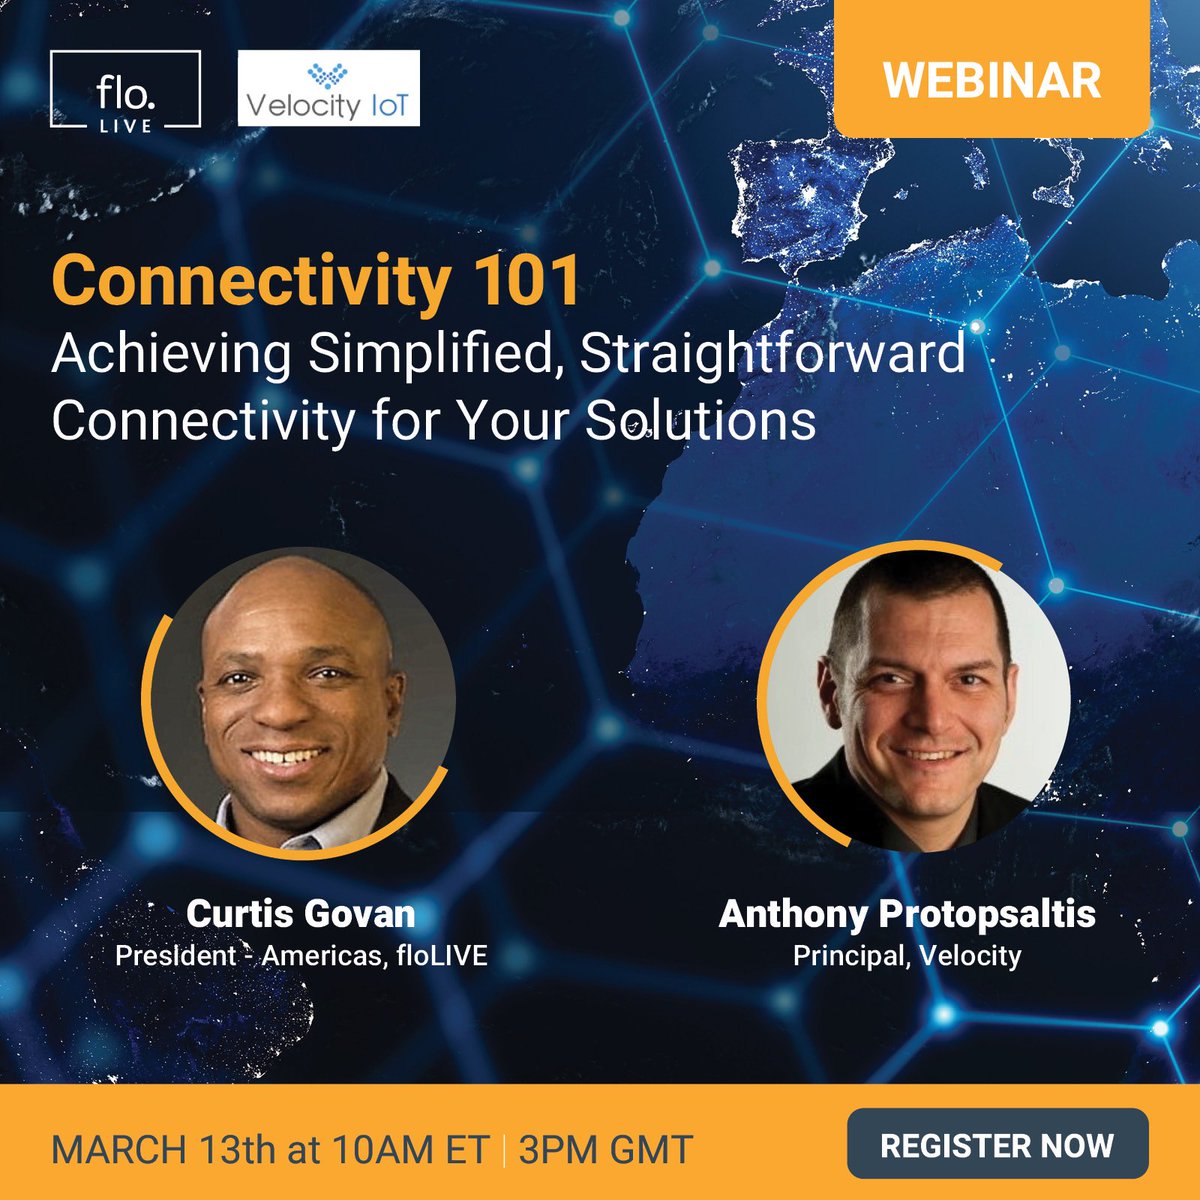 floLIVE and @VelocityIoT are teaming up to present “Connectivity 101” on March 13 at 10 a.m. ET/3 p.m. GMT so you can get the most simplified and effective approach to powering your devices. 
hubs.li/Q02mmHH50..

#Connectivity #ConnectedDevices #IoTSolutions #IoT